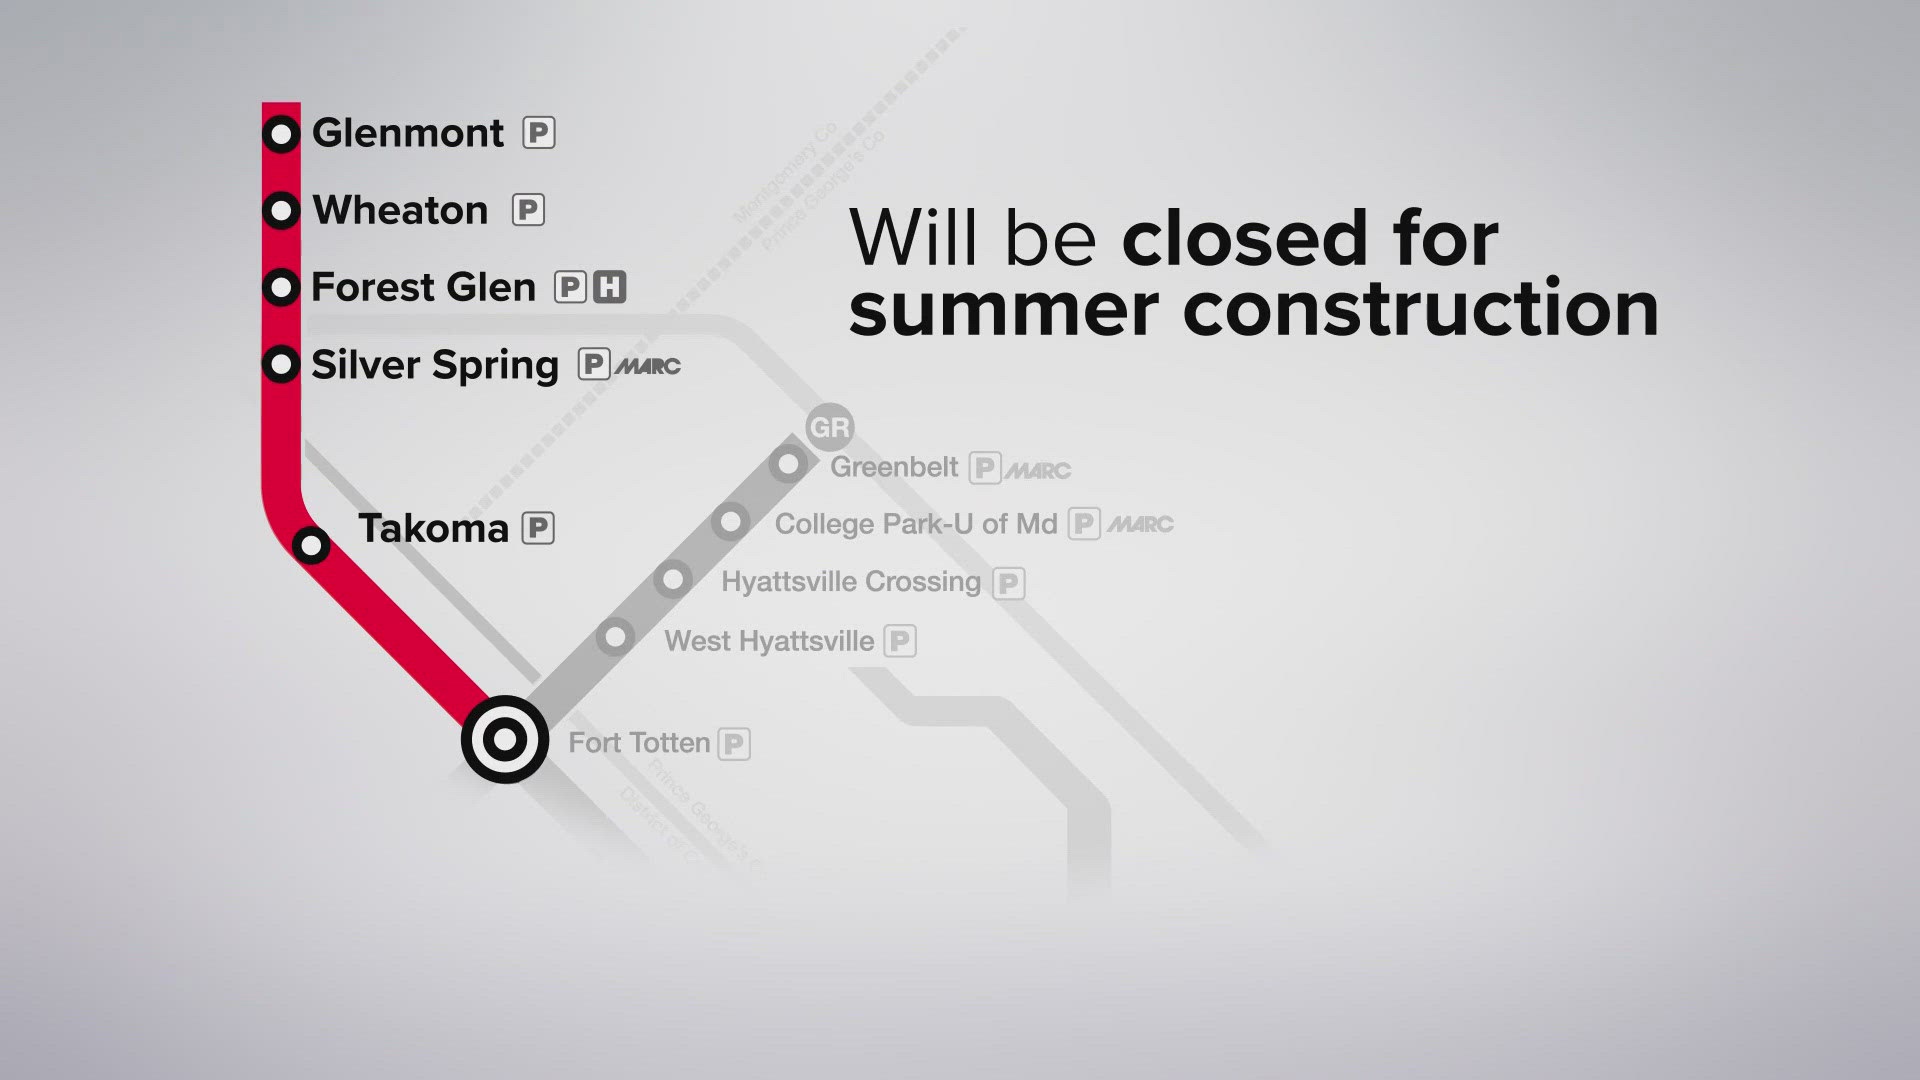 Green Line trains will single track between Naylor Road and Branch Avenue. And Red Line service will be suspended at the Brookland-CUA and Fort Totten stations.